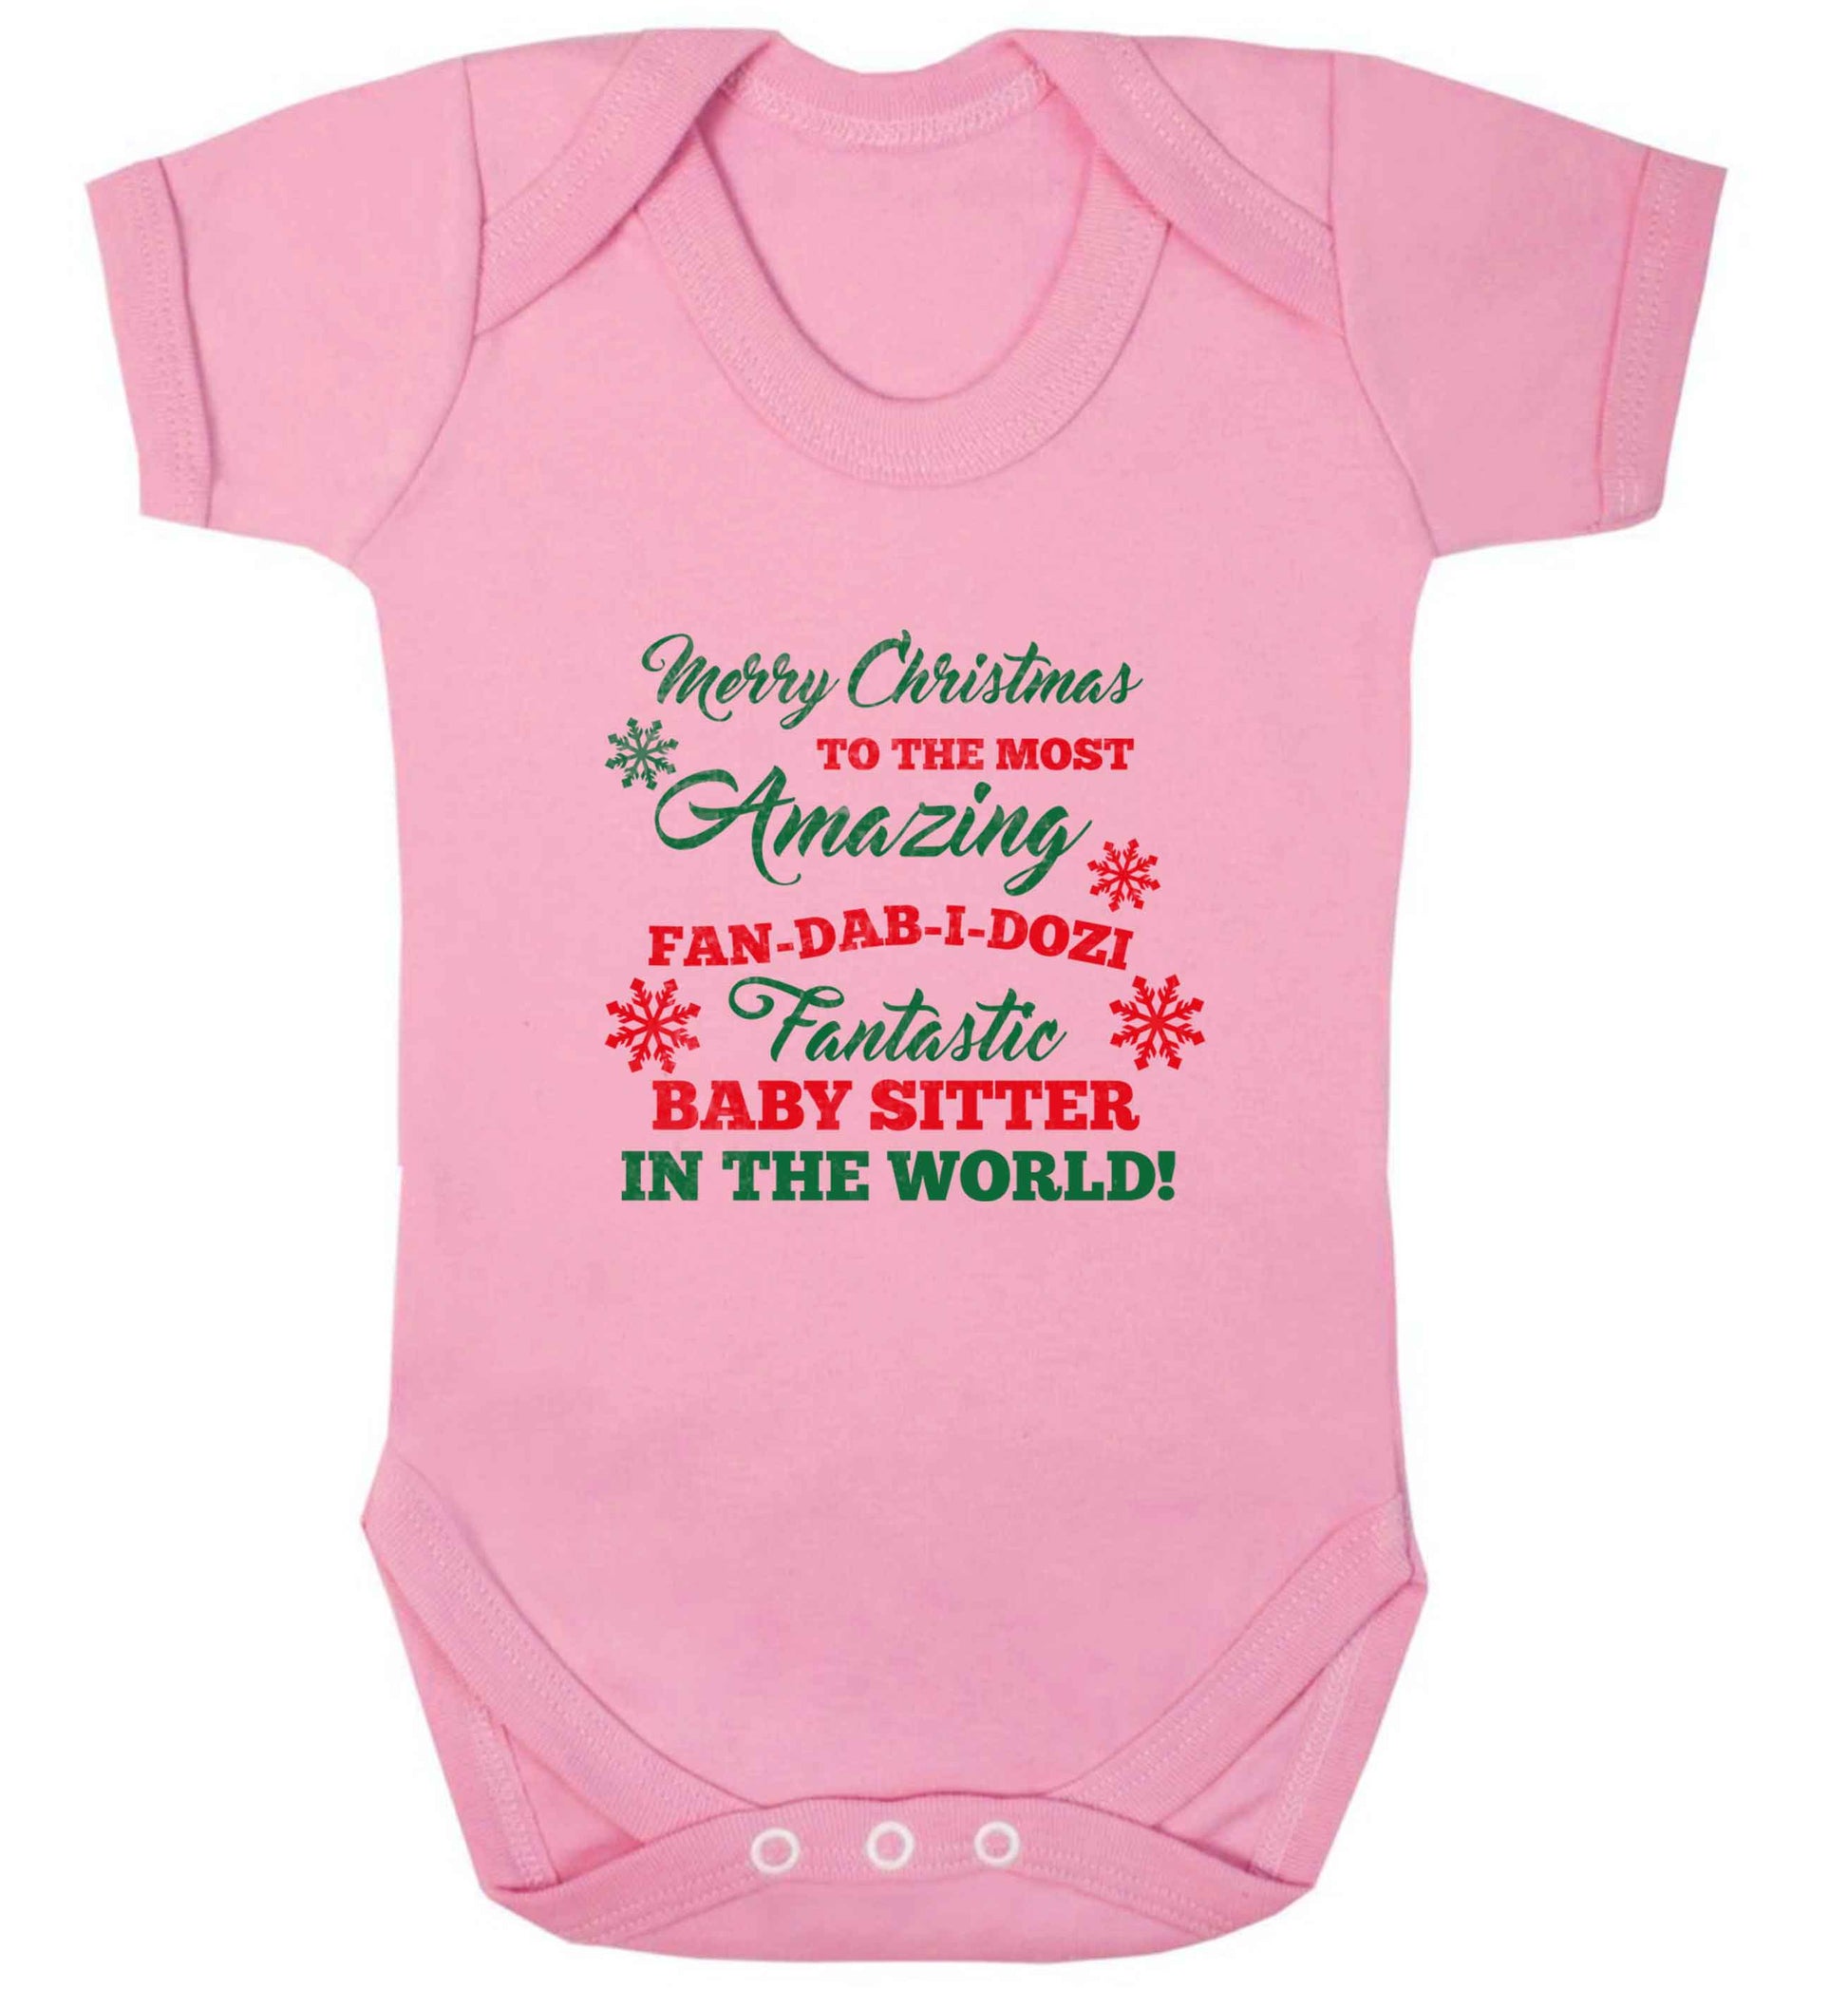 Merry Christmas to the most amazing fan-dab-i-dozi fantasic baby sitter in the world baby vest pale pink 18-24 months